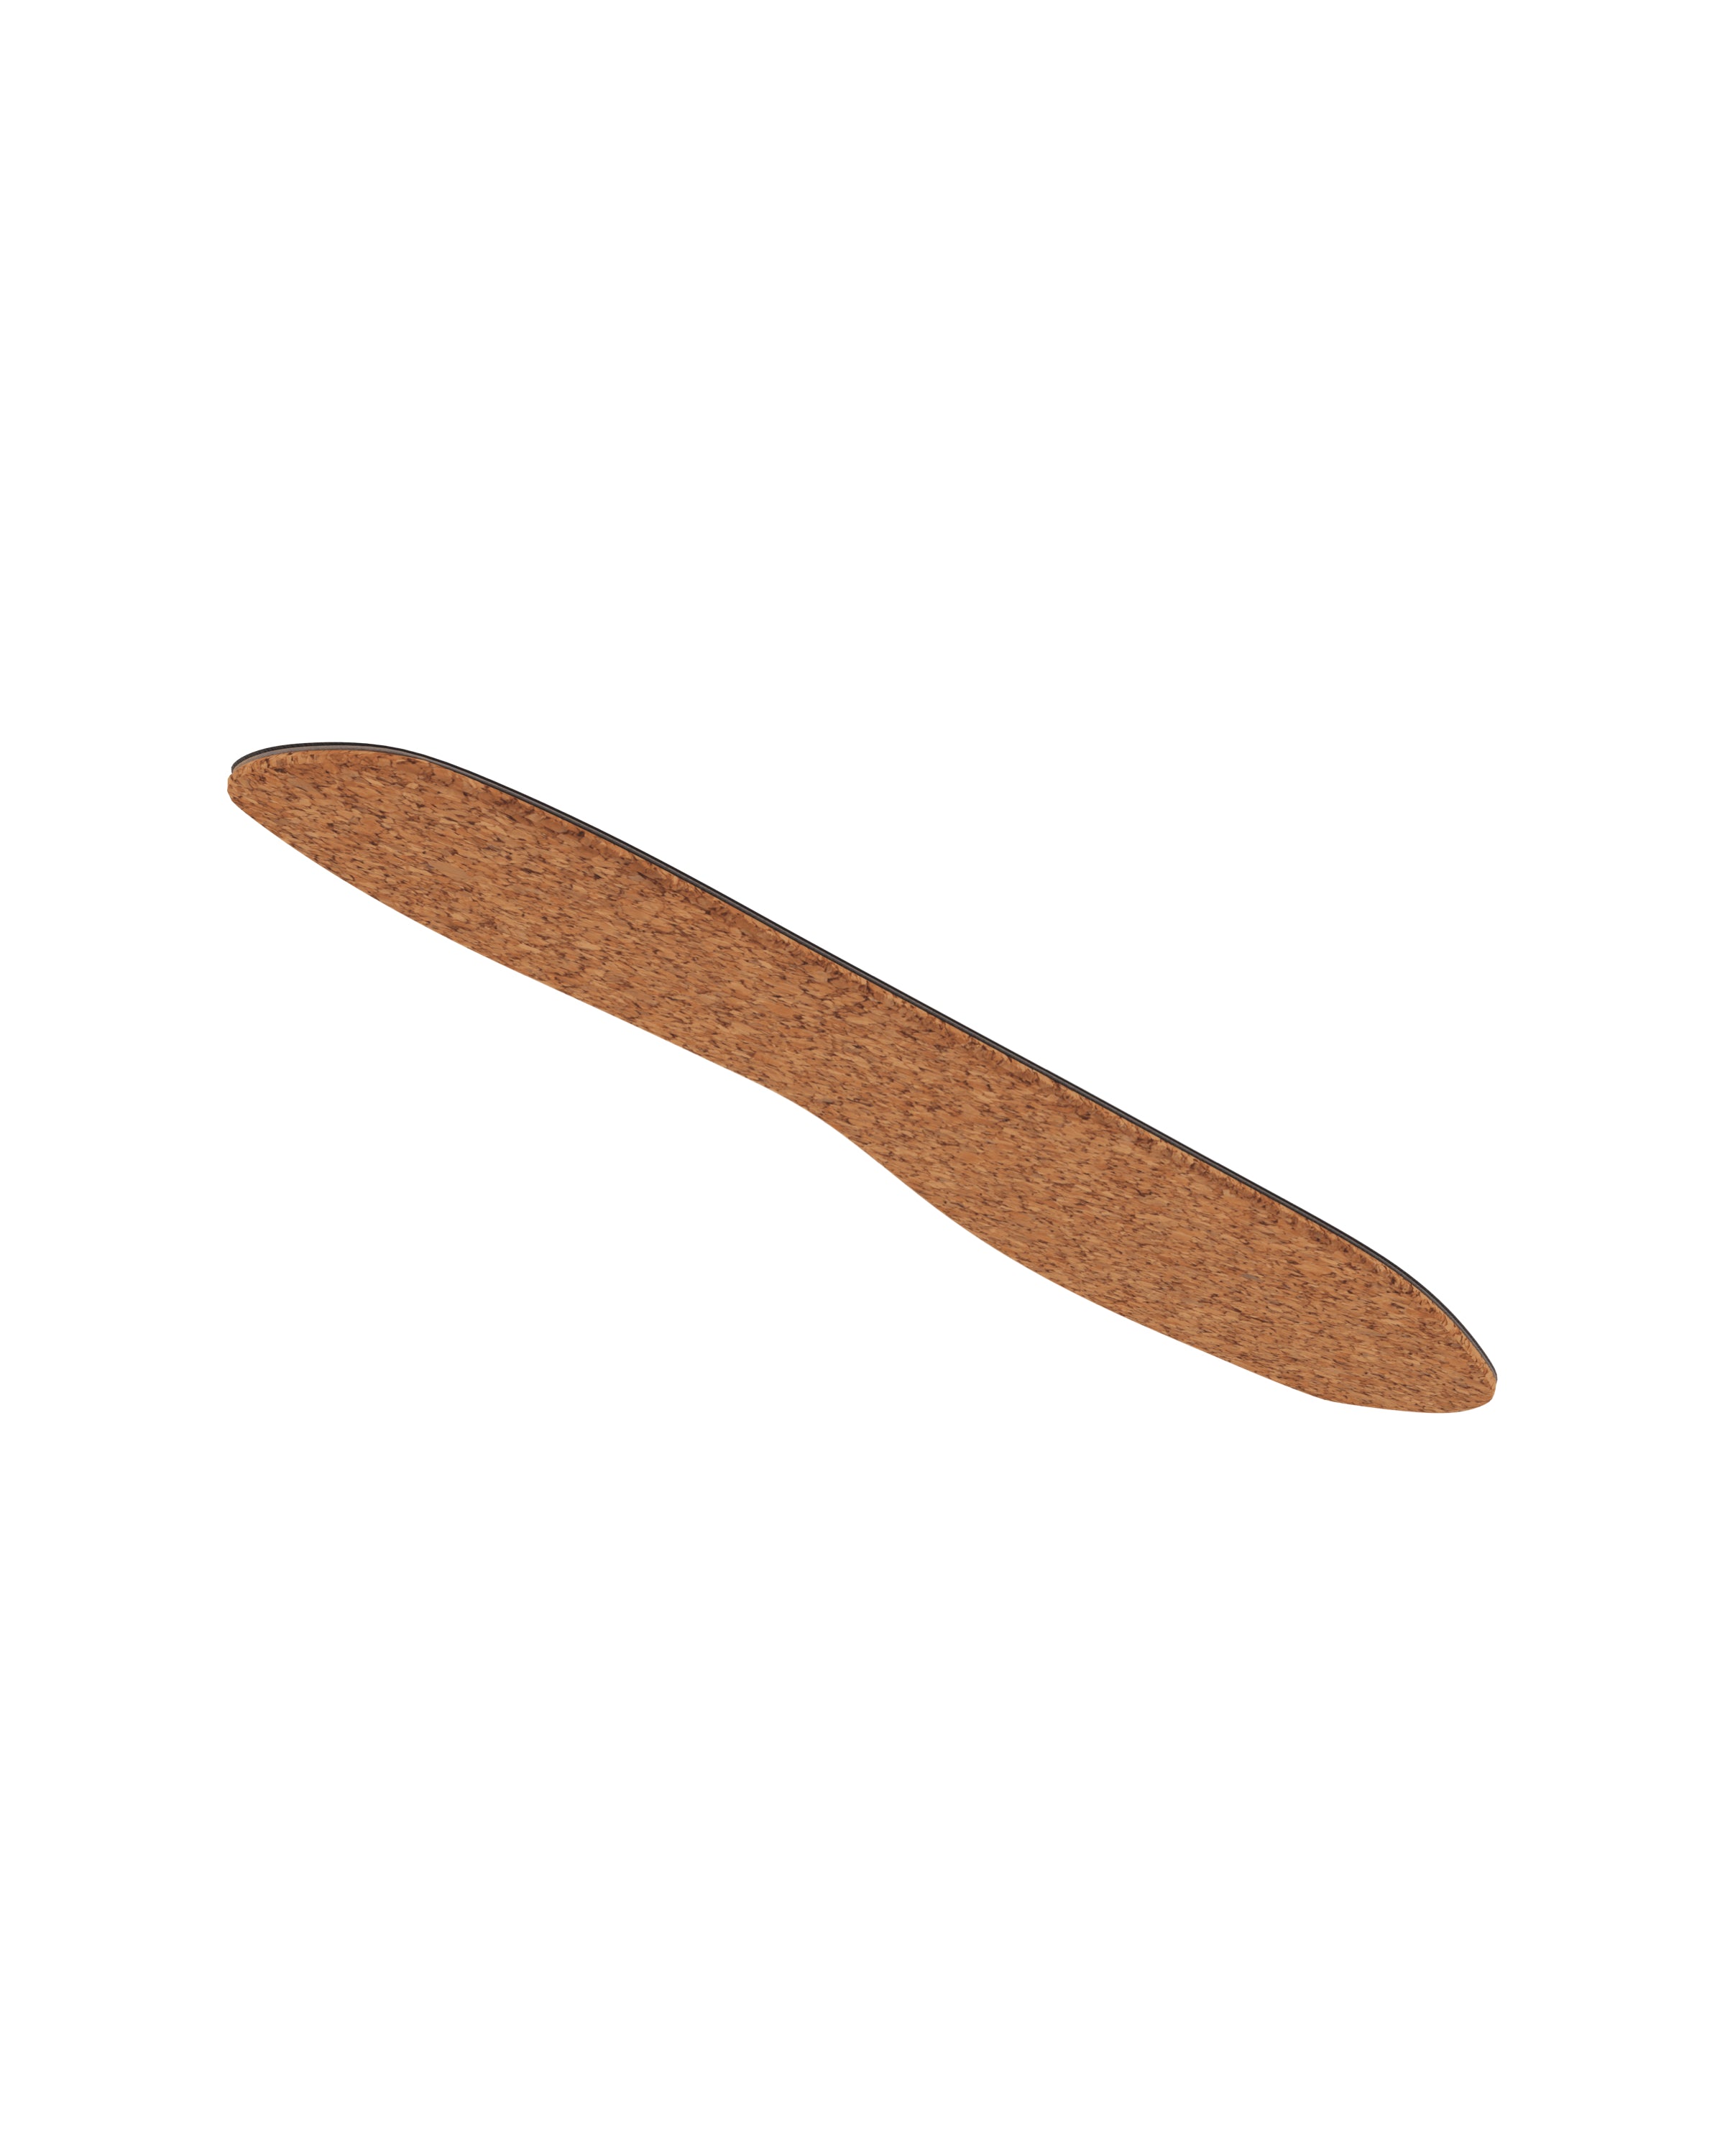 RECYCLED CORK INSOLE